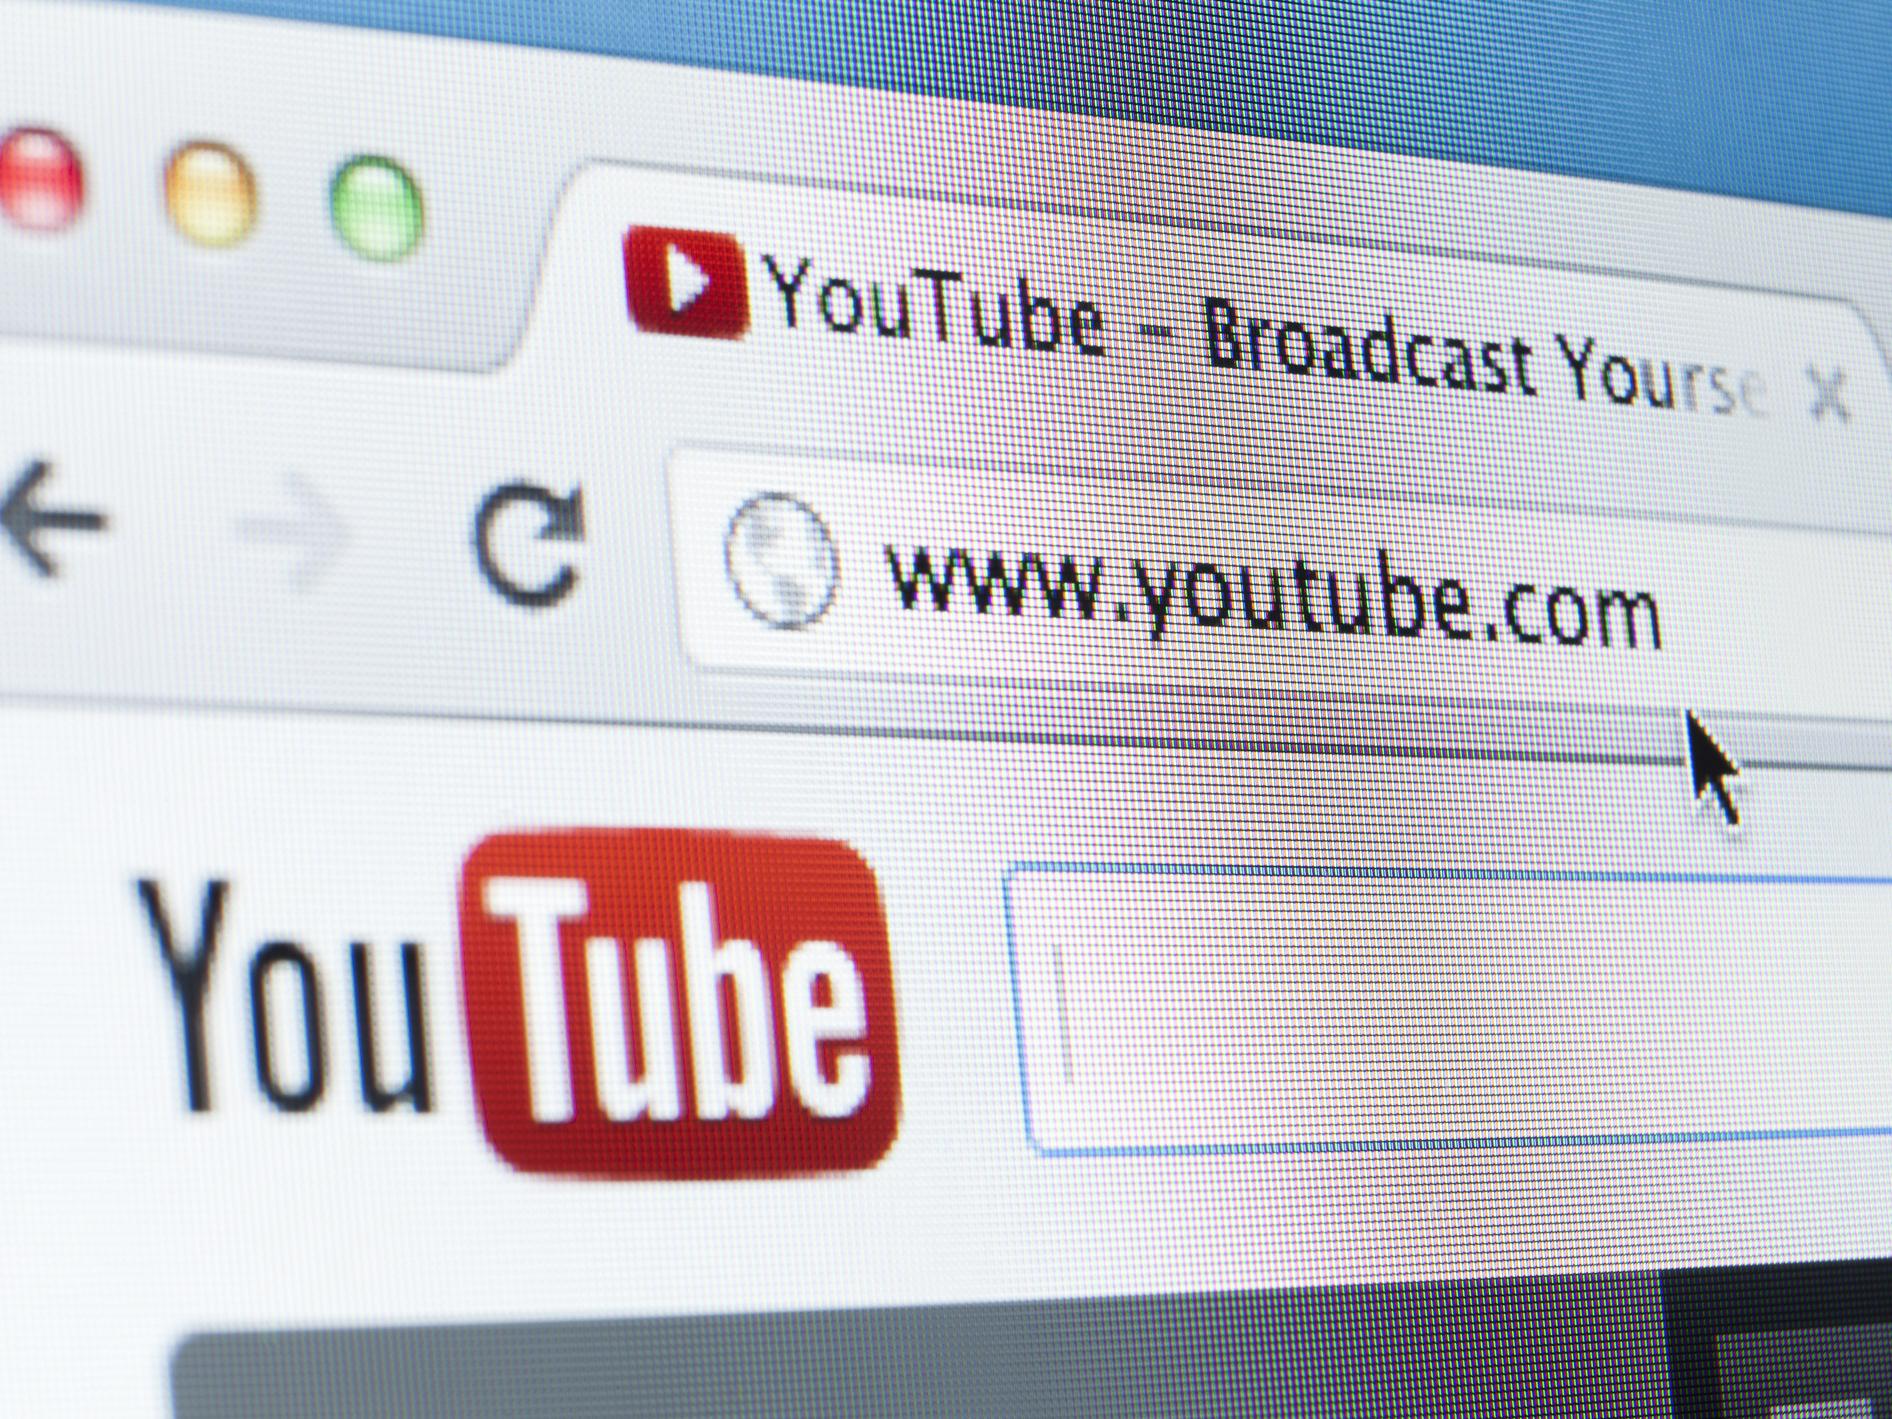 YouTube is accused of illegally collecting data